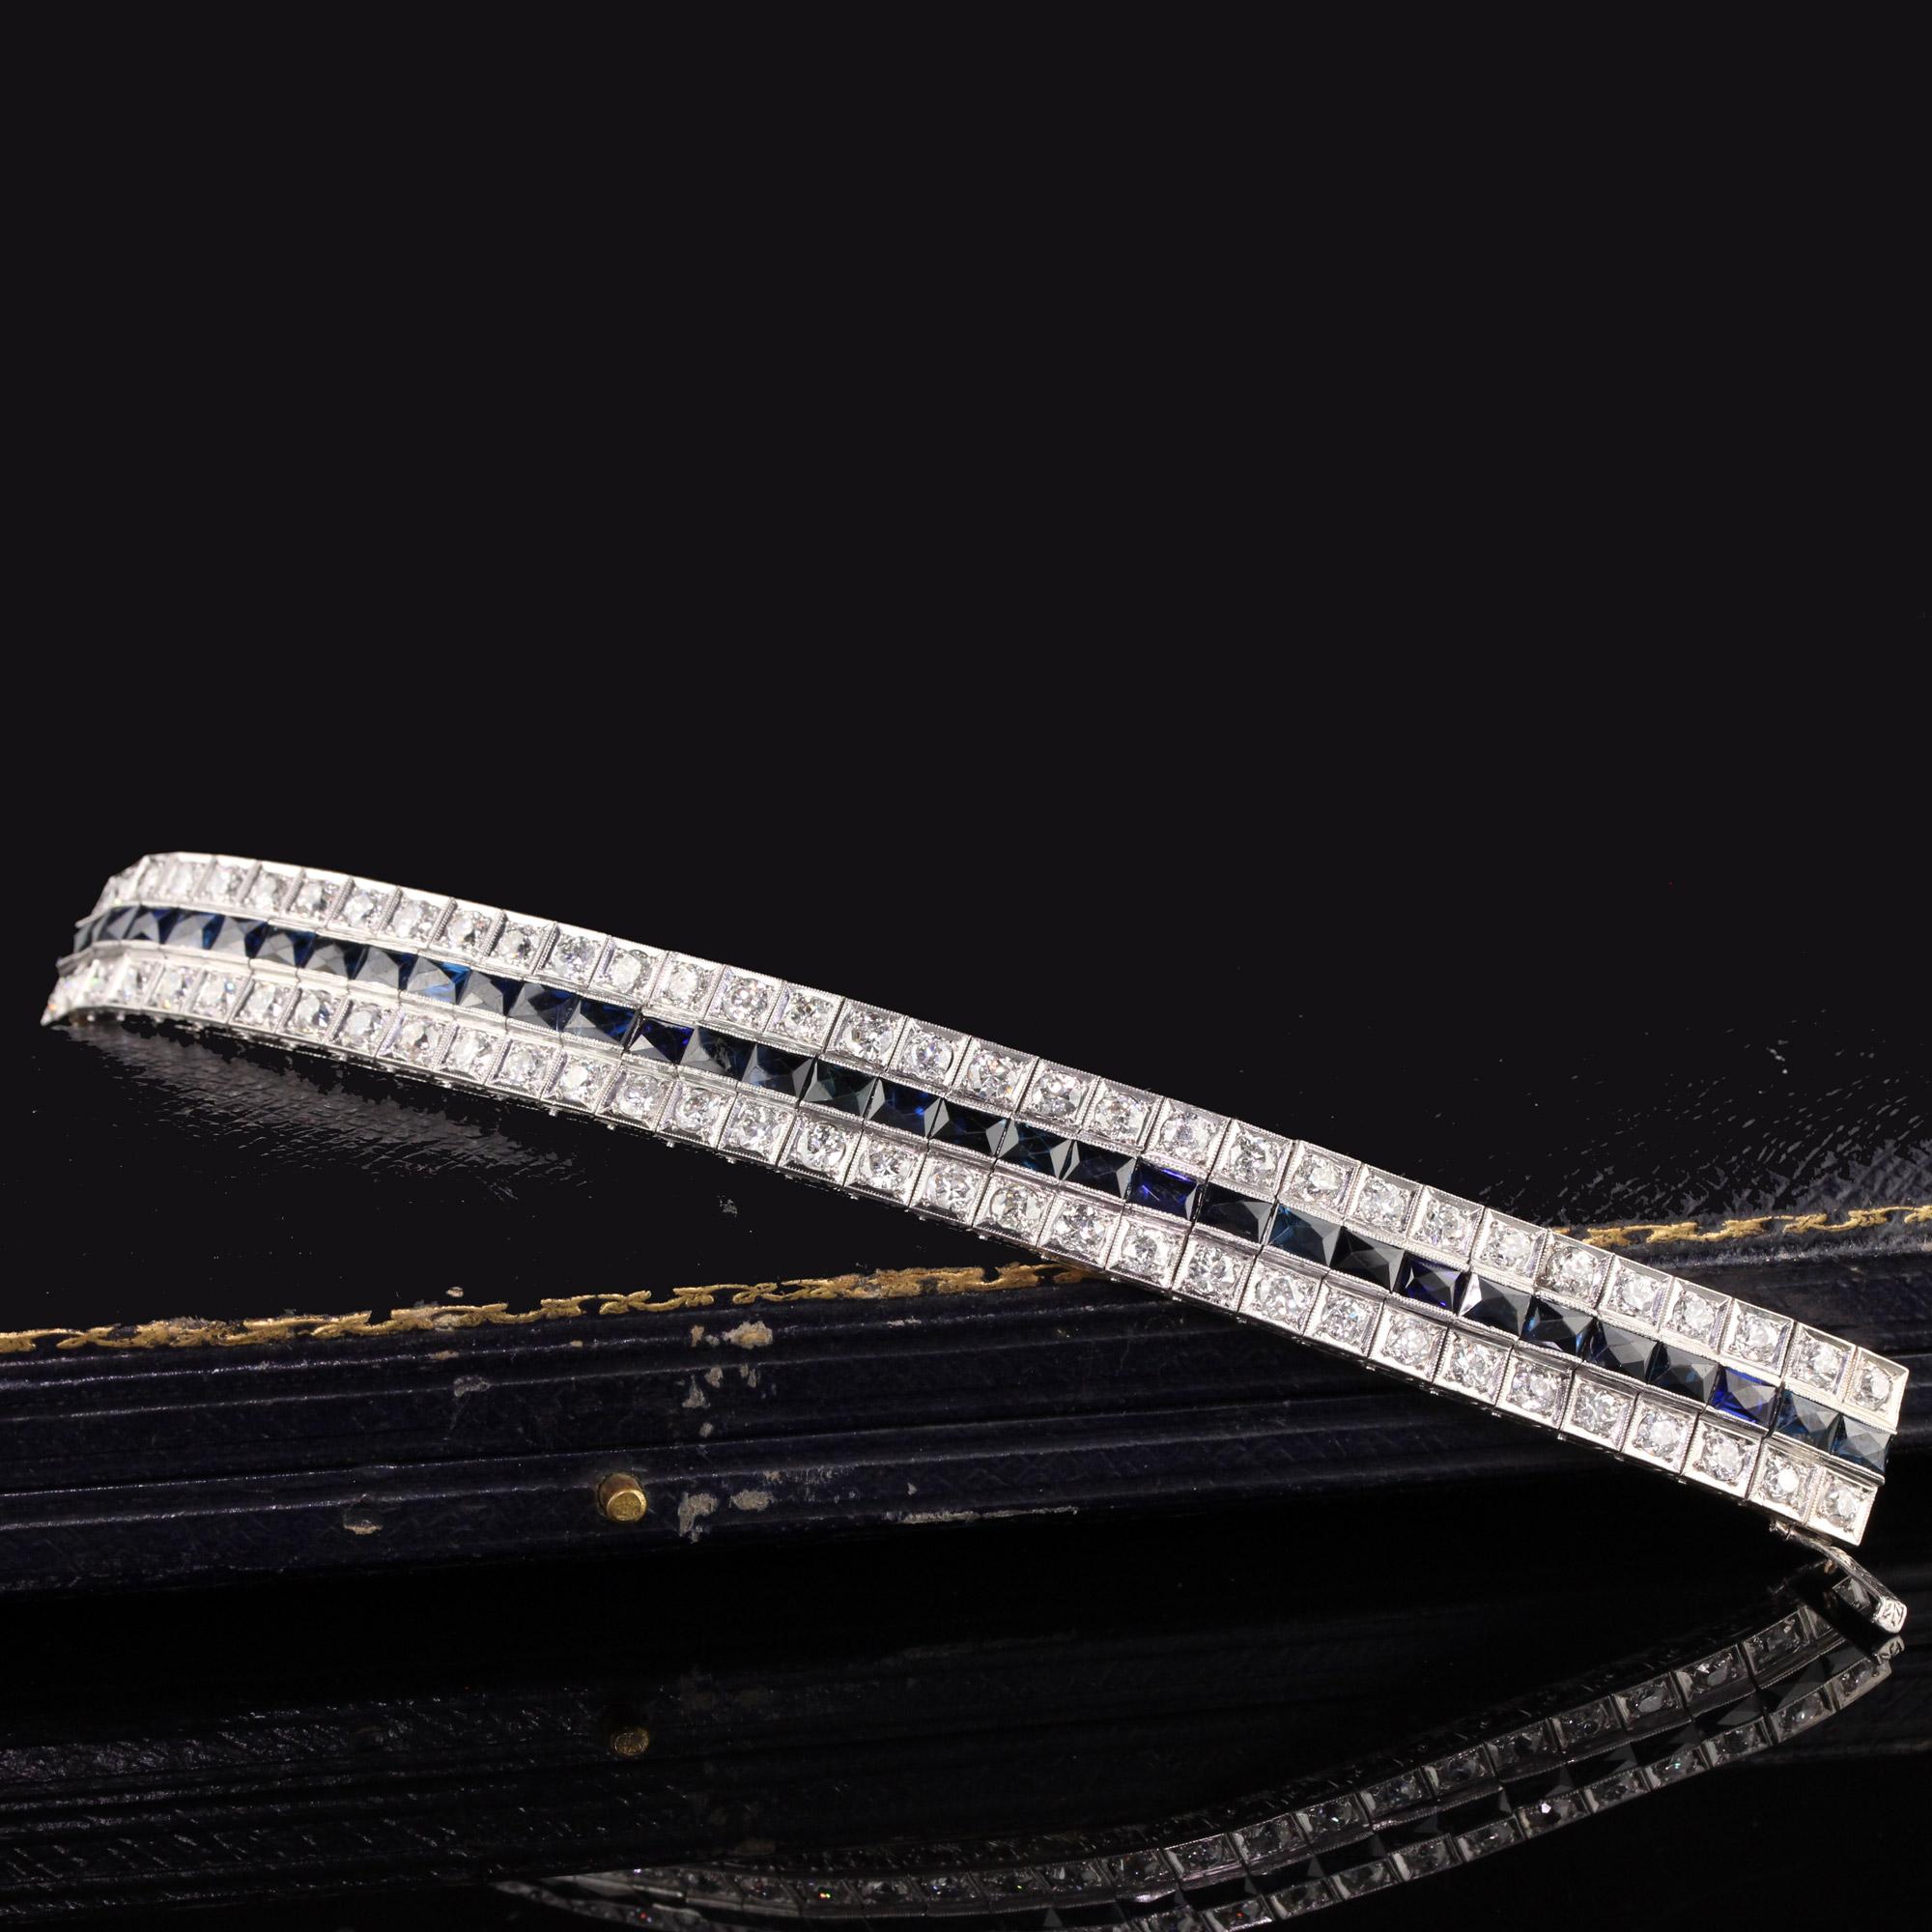 Beautiful Antique Art Deco Platinum Old European Diamond and Sapphire Line Bracelet. This incredible Art Deco bracelet has approximately 12 cts of diamonds and approximately 10 cts of natural sapphries in the center. It has engravings on the sides